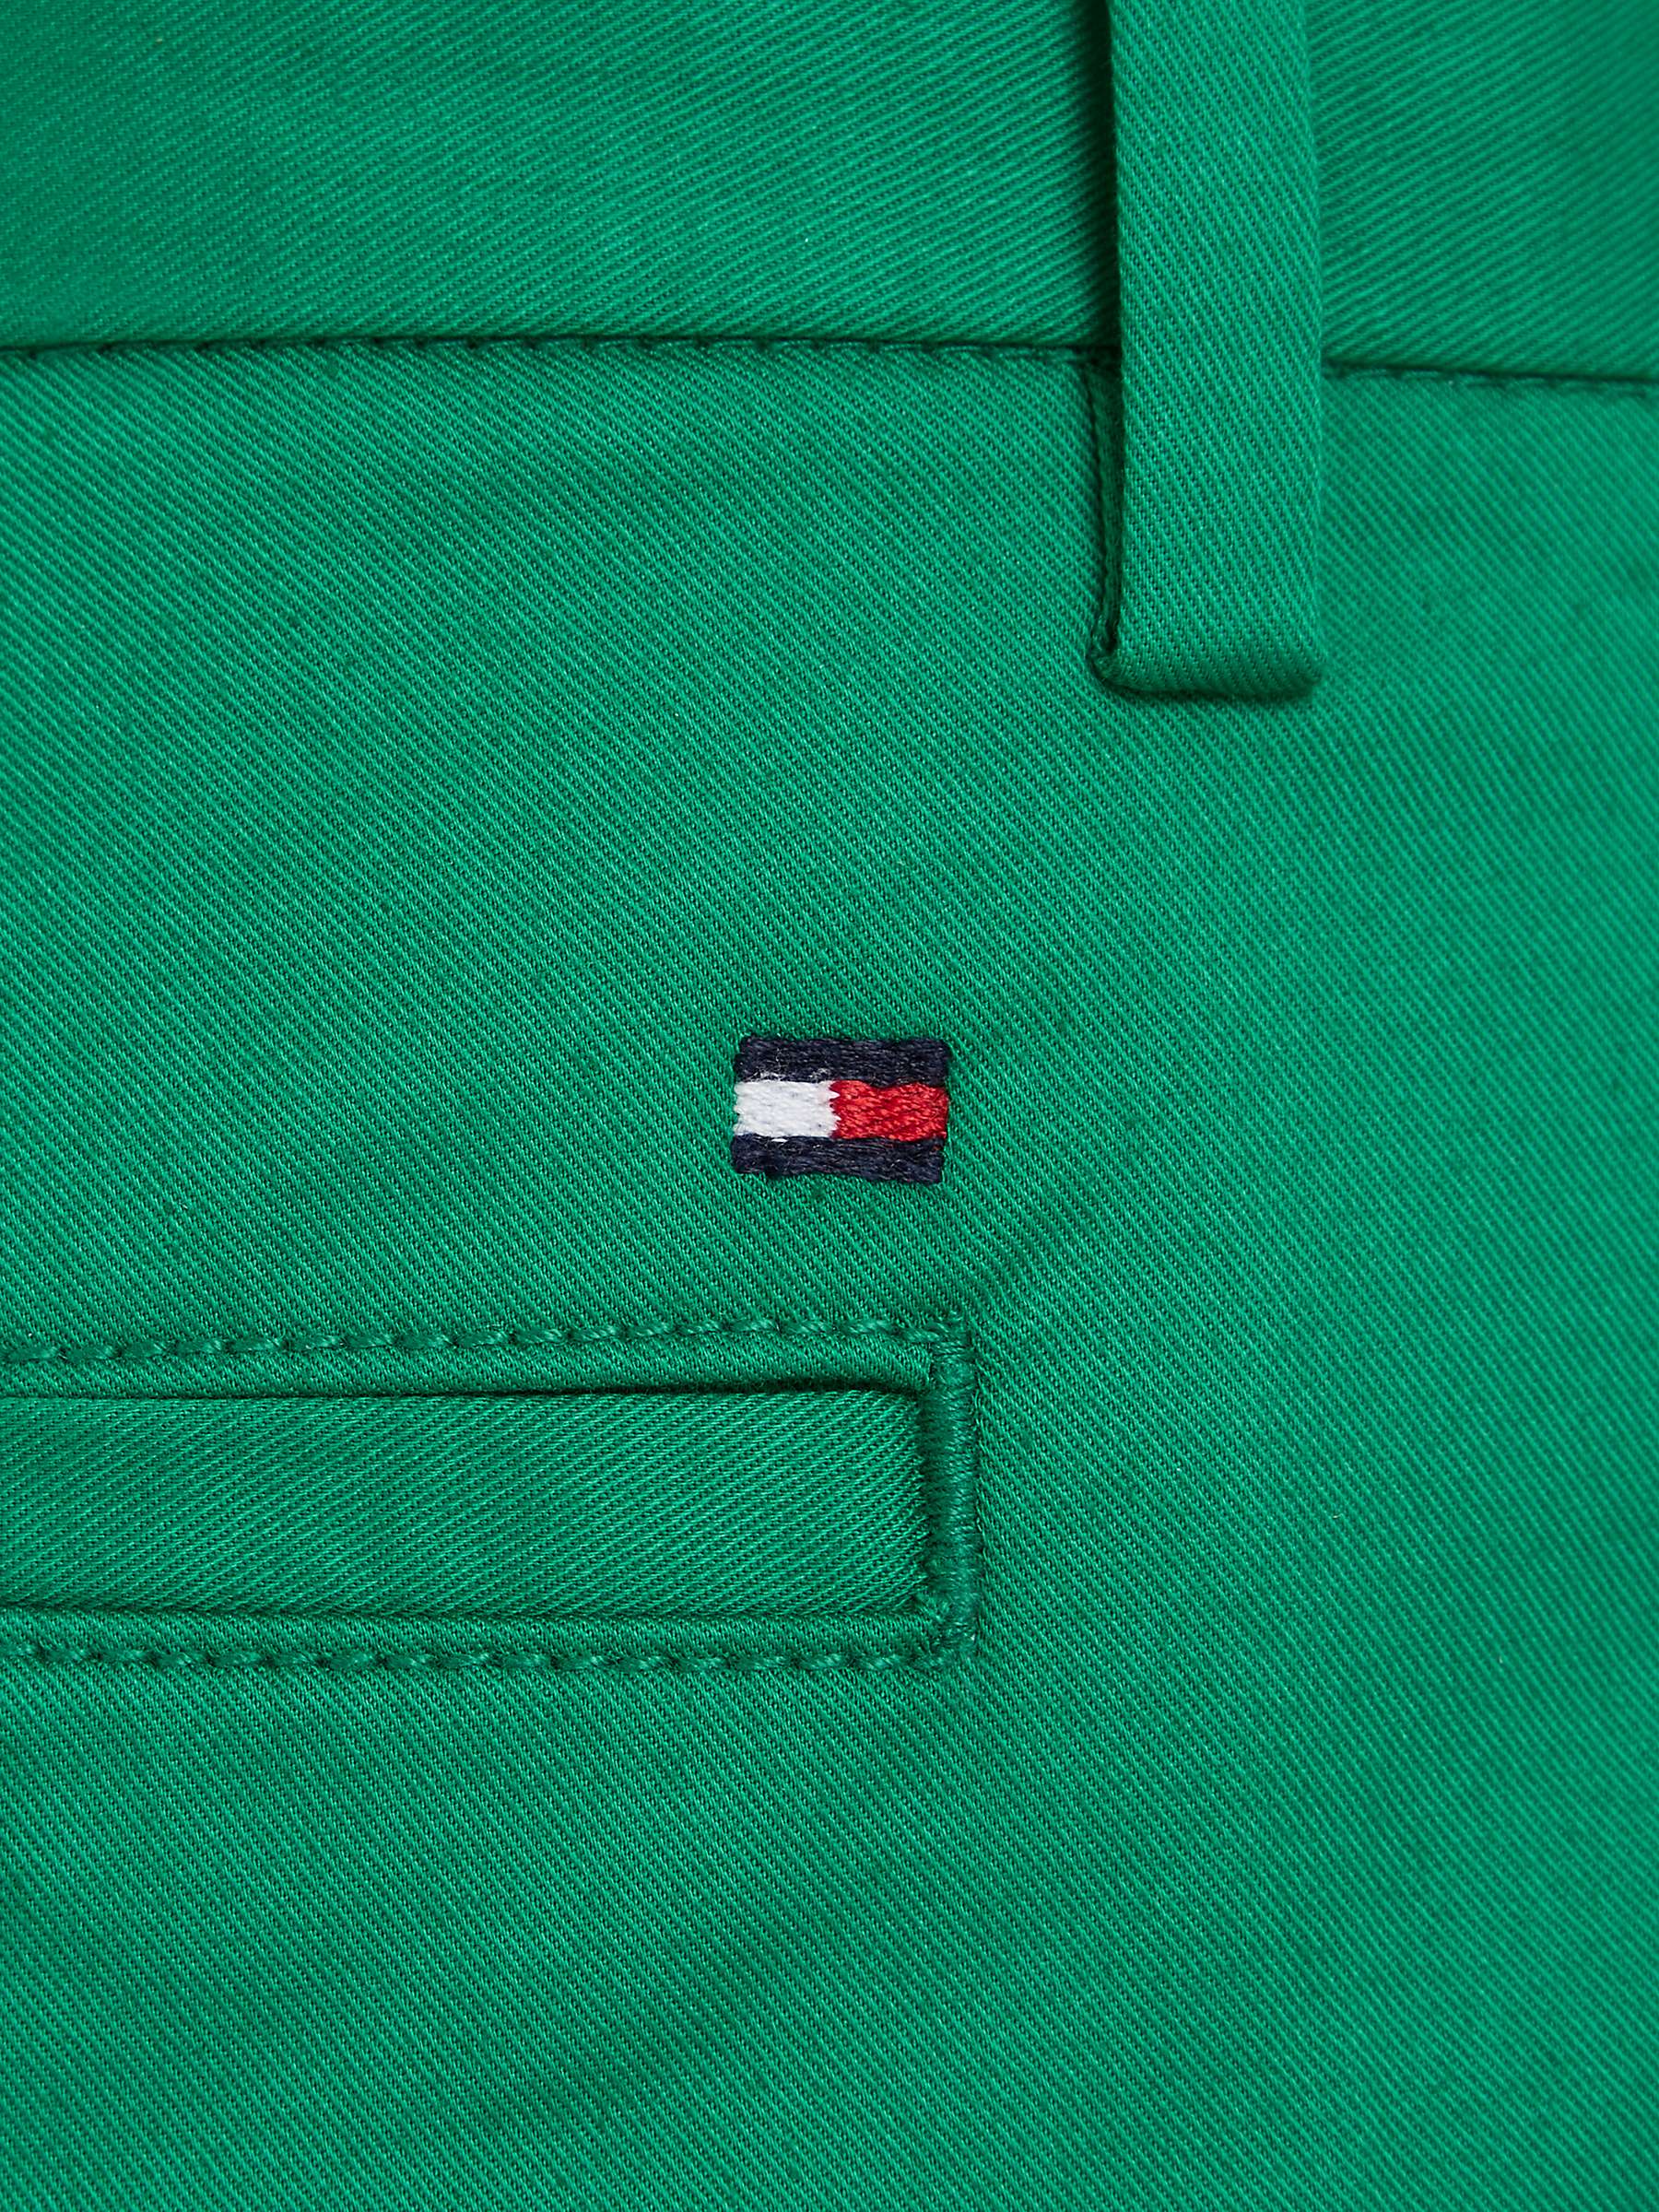 Buy Tommy Hilfiger Kids' 1985 Chino Shorts, Olympic Green Online at johnlewis.com